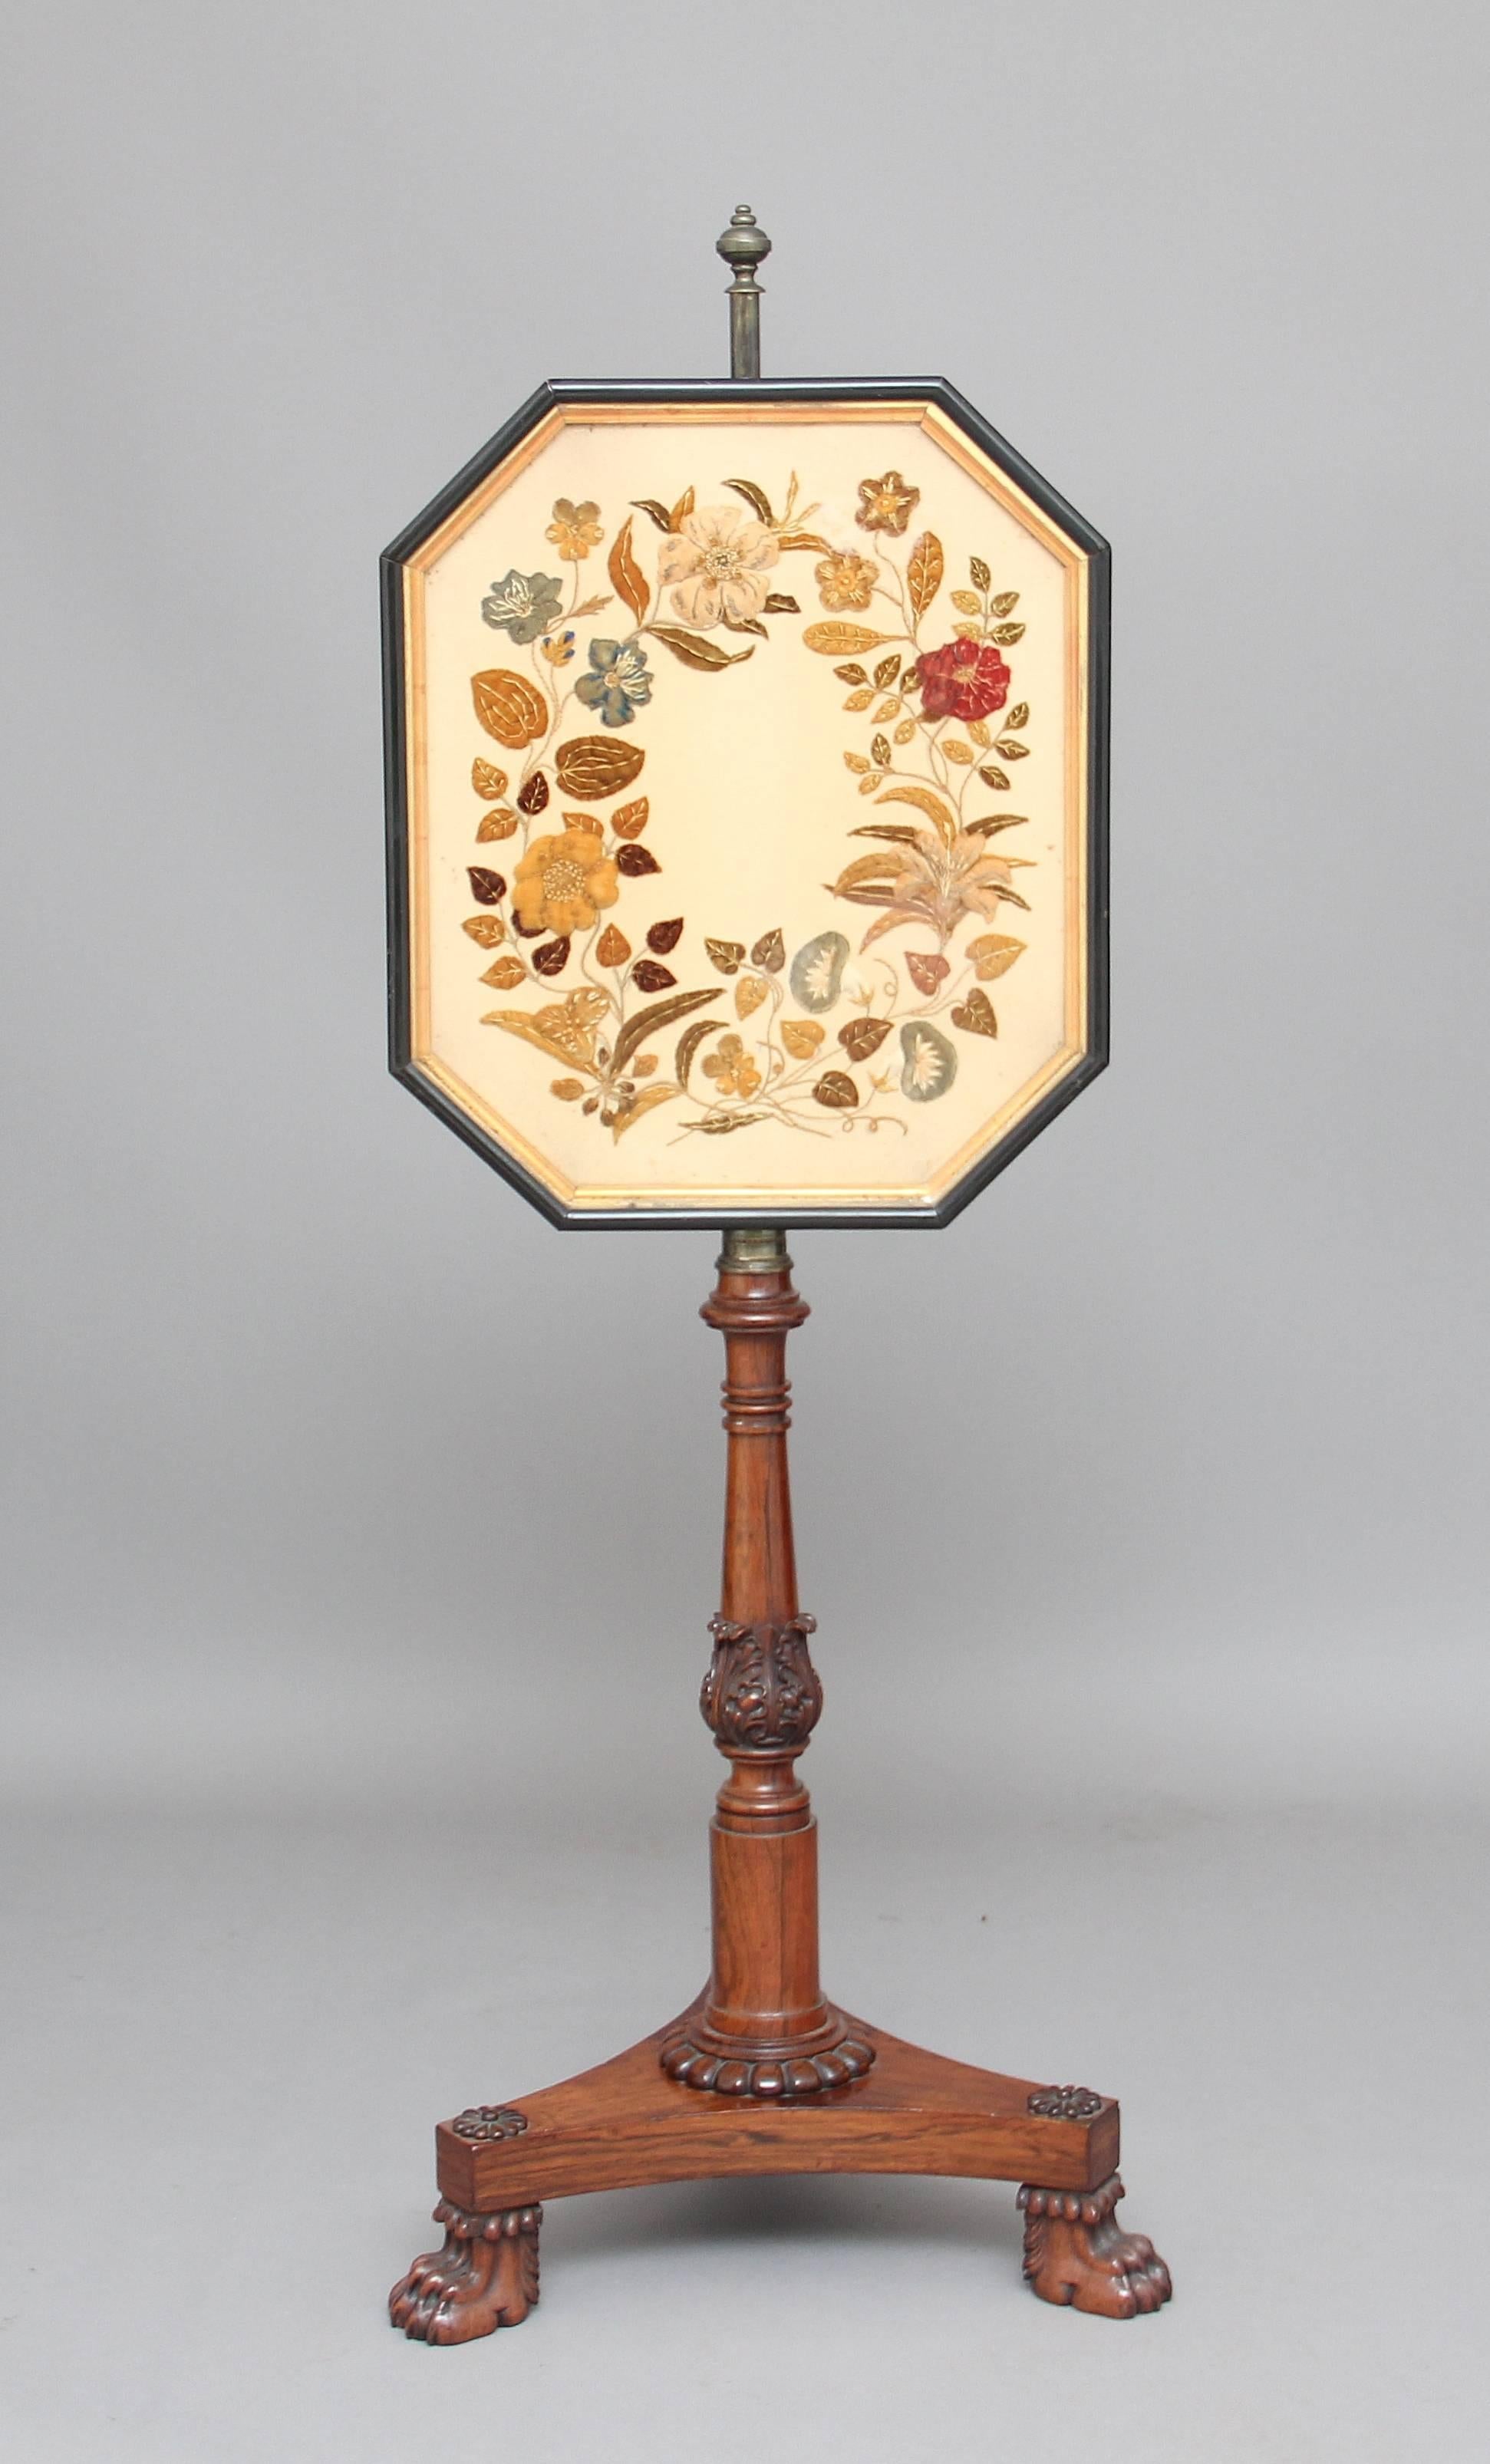 19th century rosewood fire screen, the shaped screen with the needlepoint depicting a lovely floral scene, supported on a turned and carved column which leads down to a tri form base decorated with carved patraes, standing on claw feet, circa